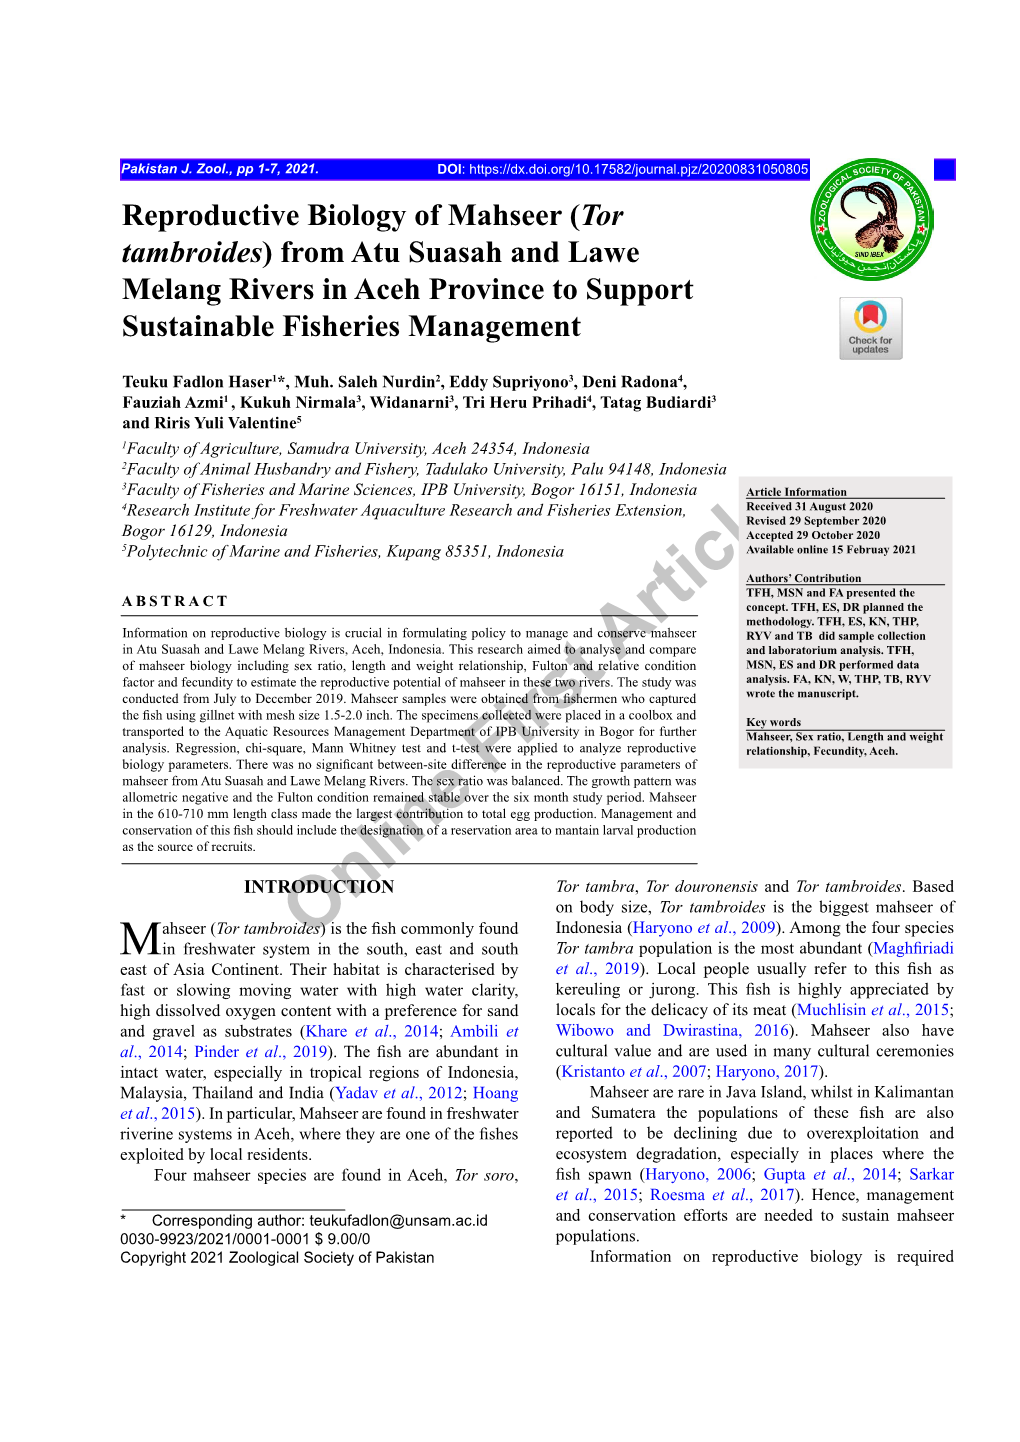 Reproductive Biology of Mahseer (Tor Tambroides) from Atu Suasah and Lawe Melang Rivers in Aceh Province to Support Sustainable Fisheries Management